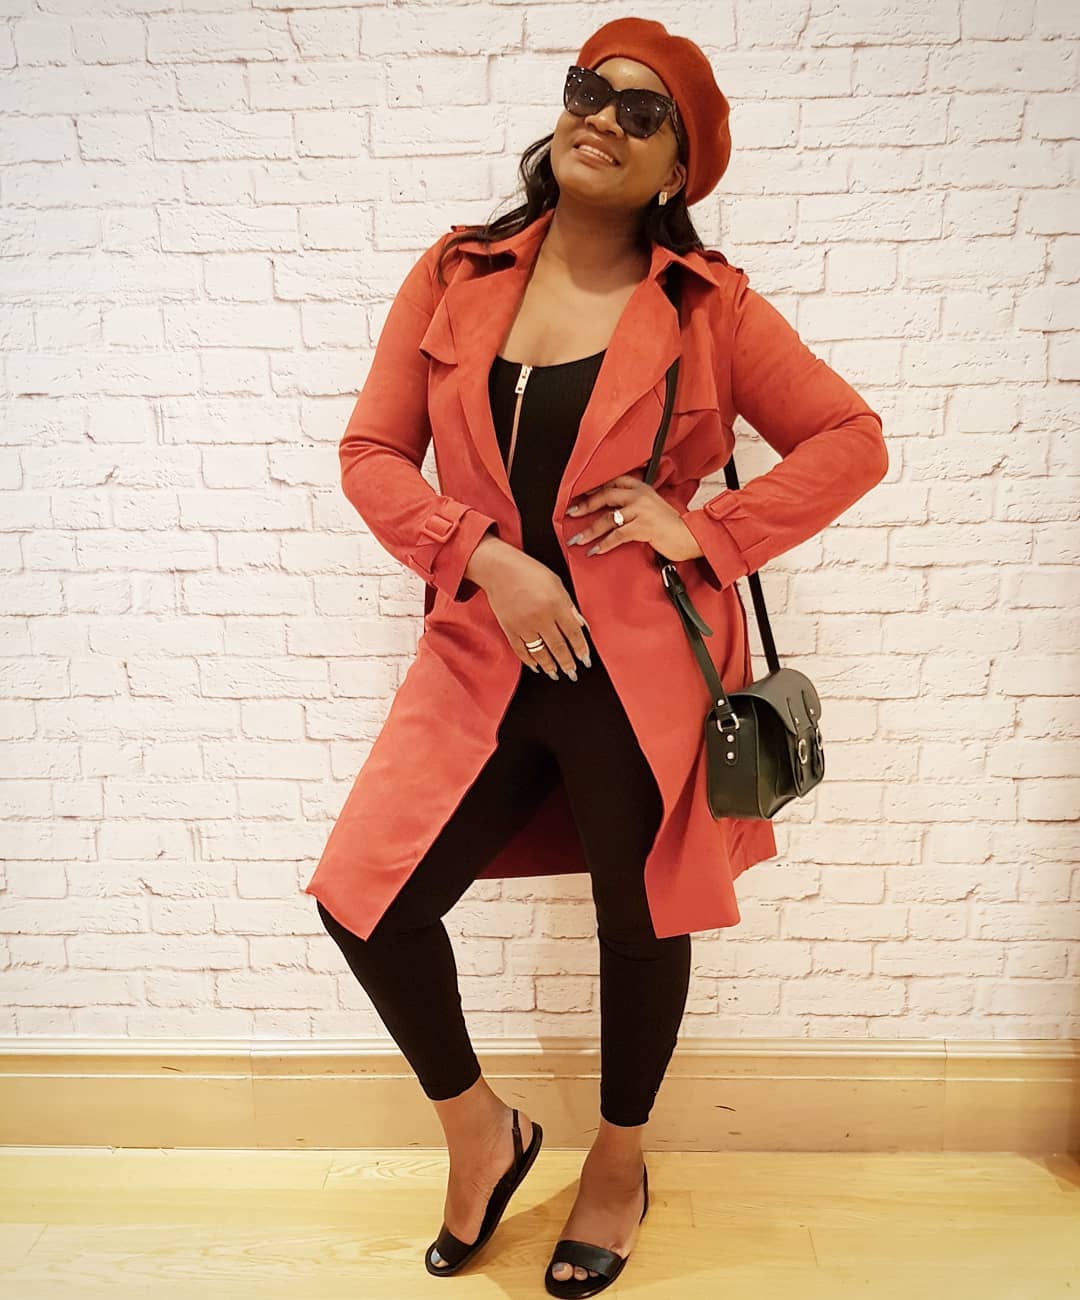 New Adorable Photo Of Omotola Jolade As She Step Out In Style ...